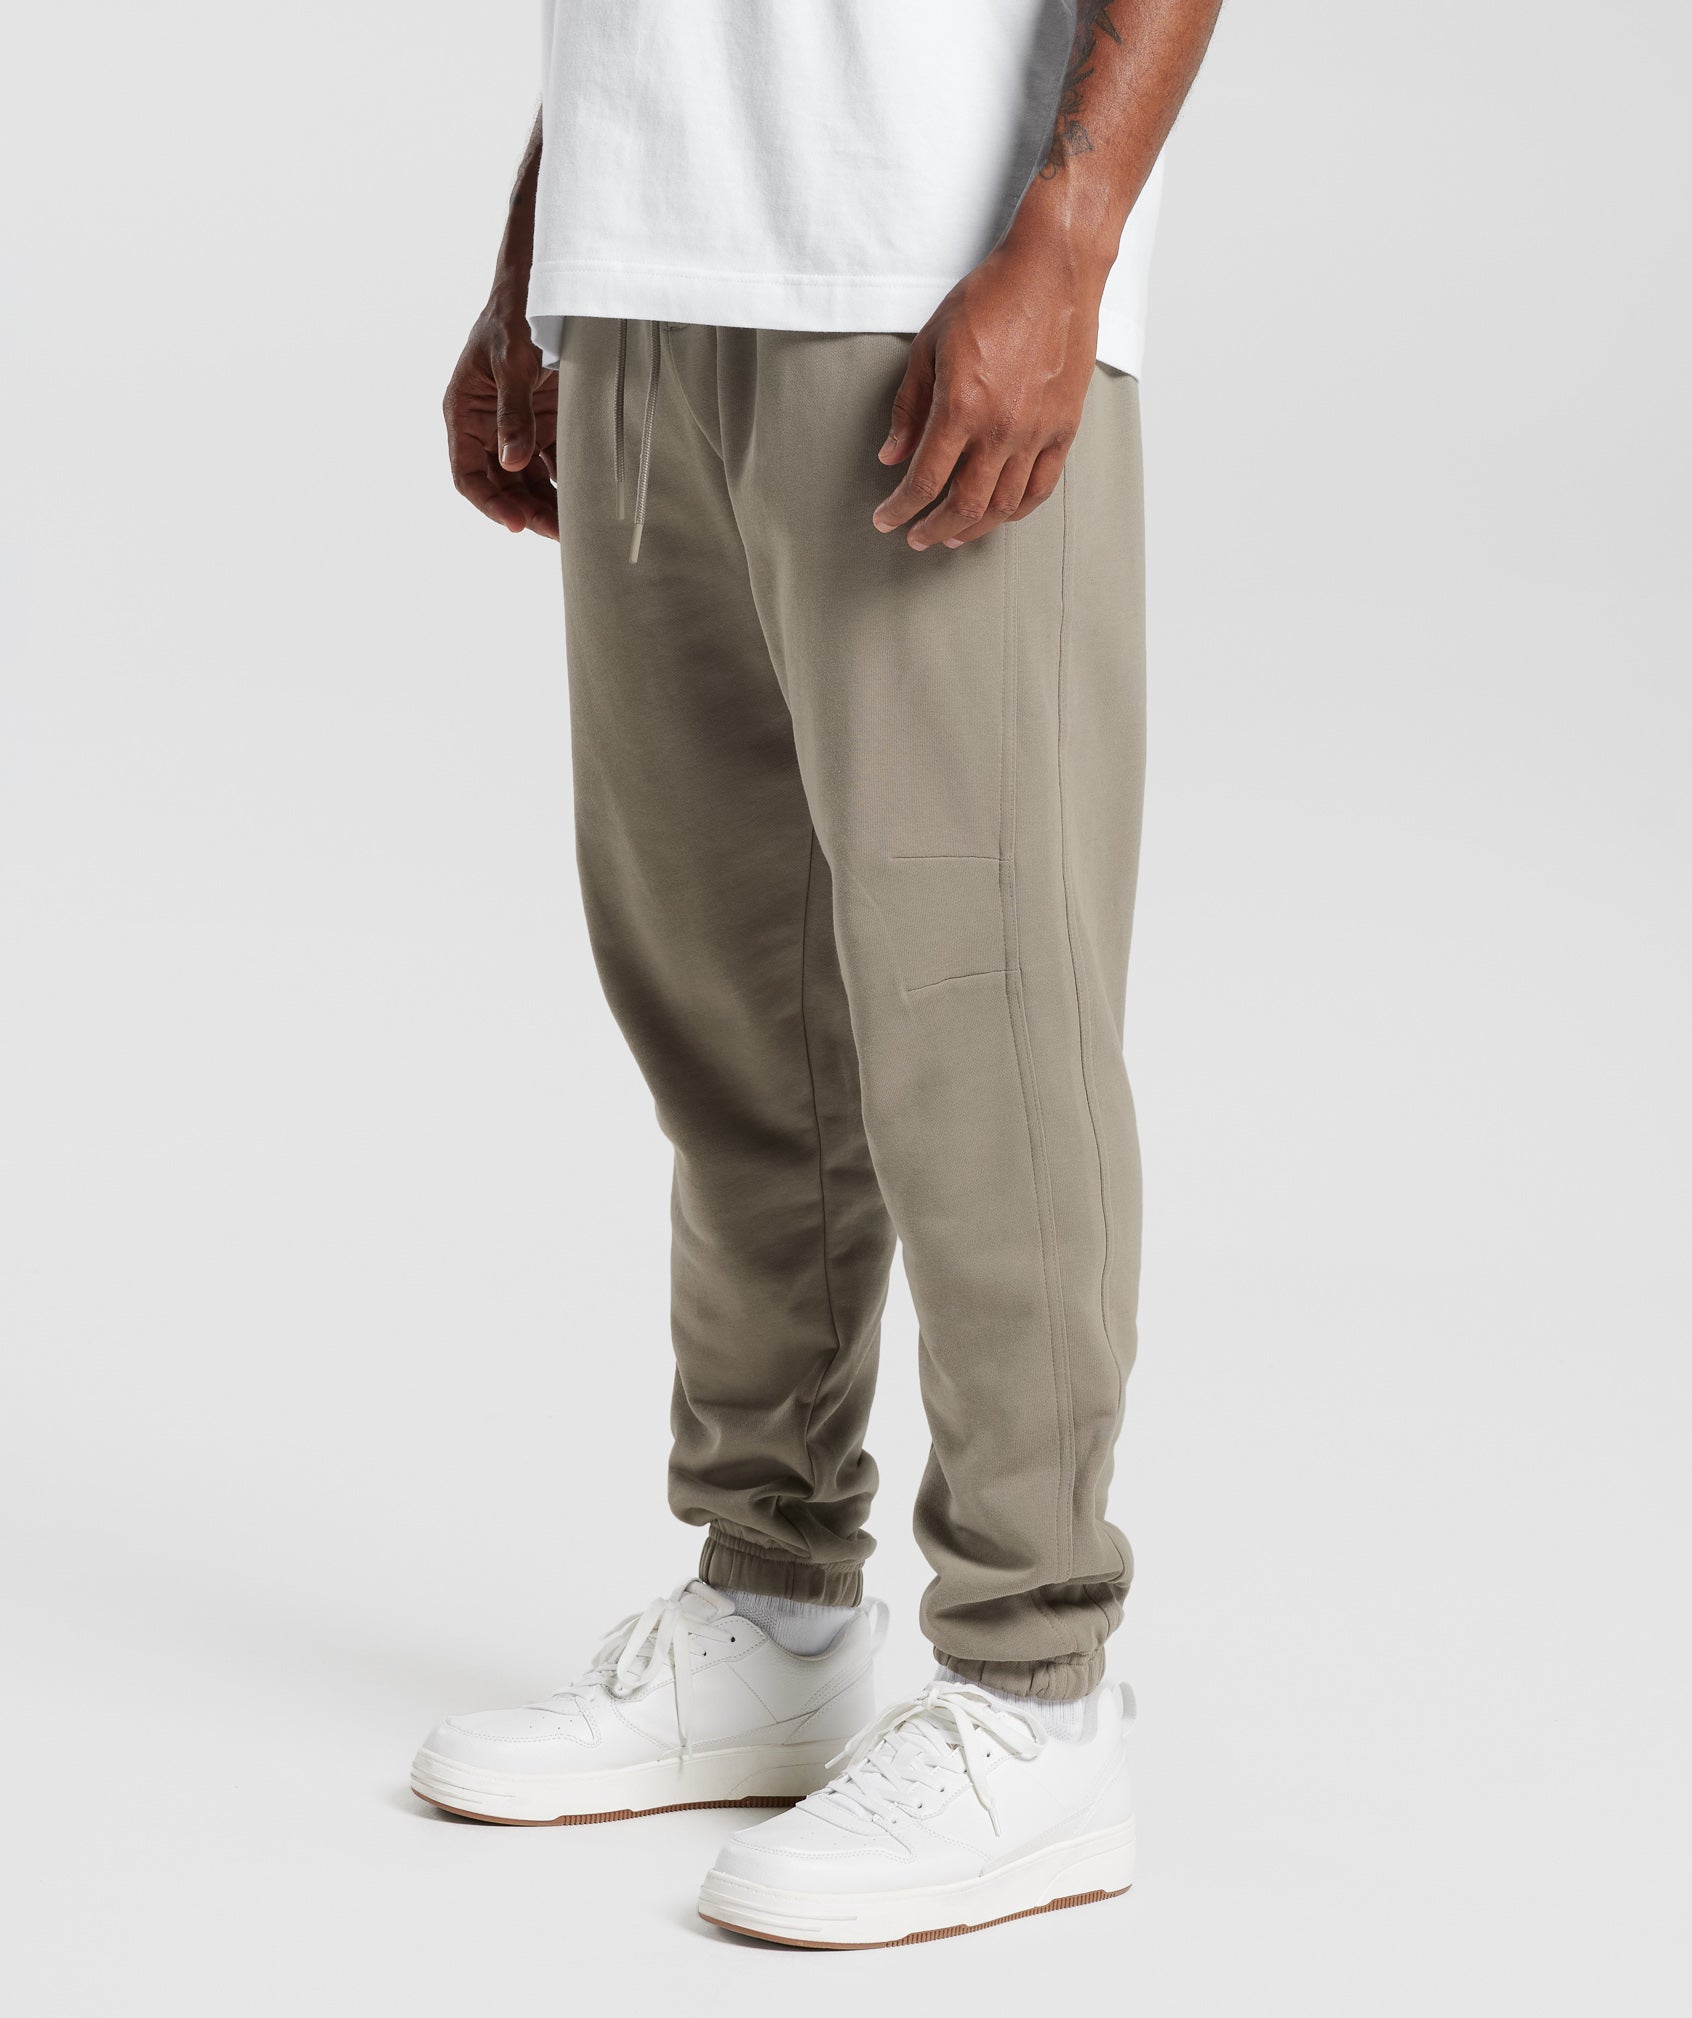 Rest Day Essentials Joggers in Linen Brown - view 3